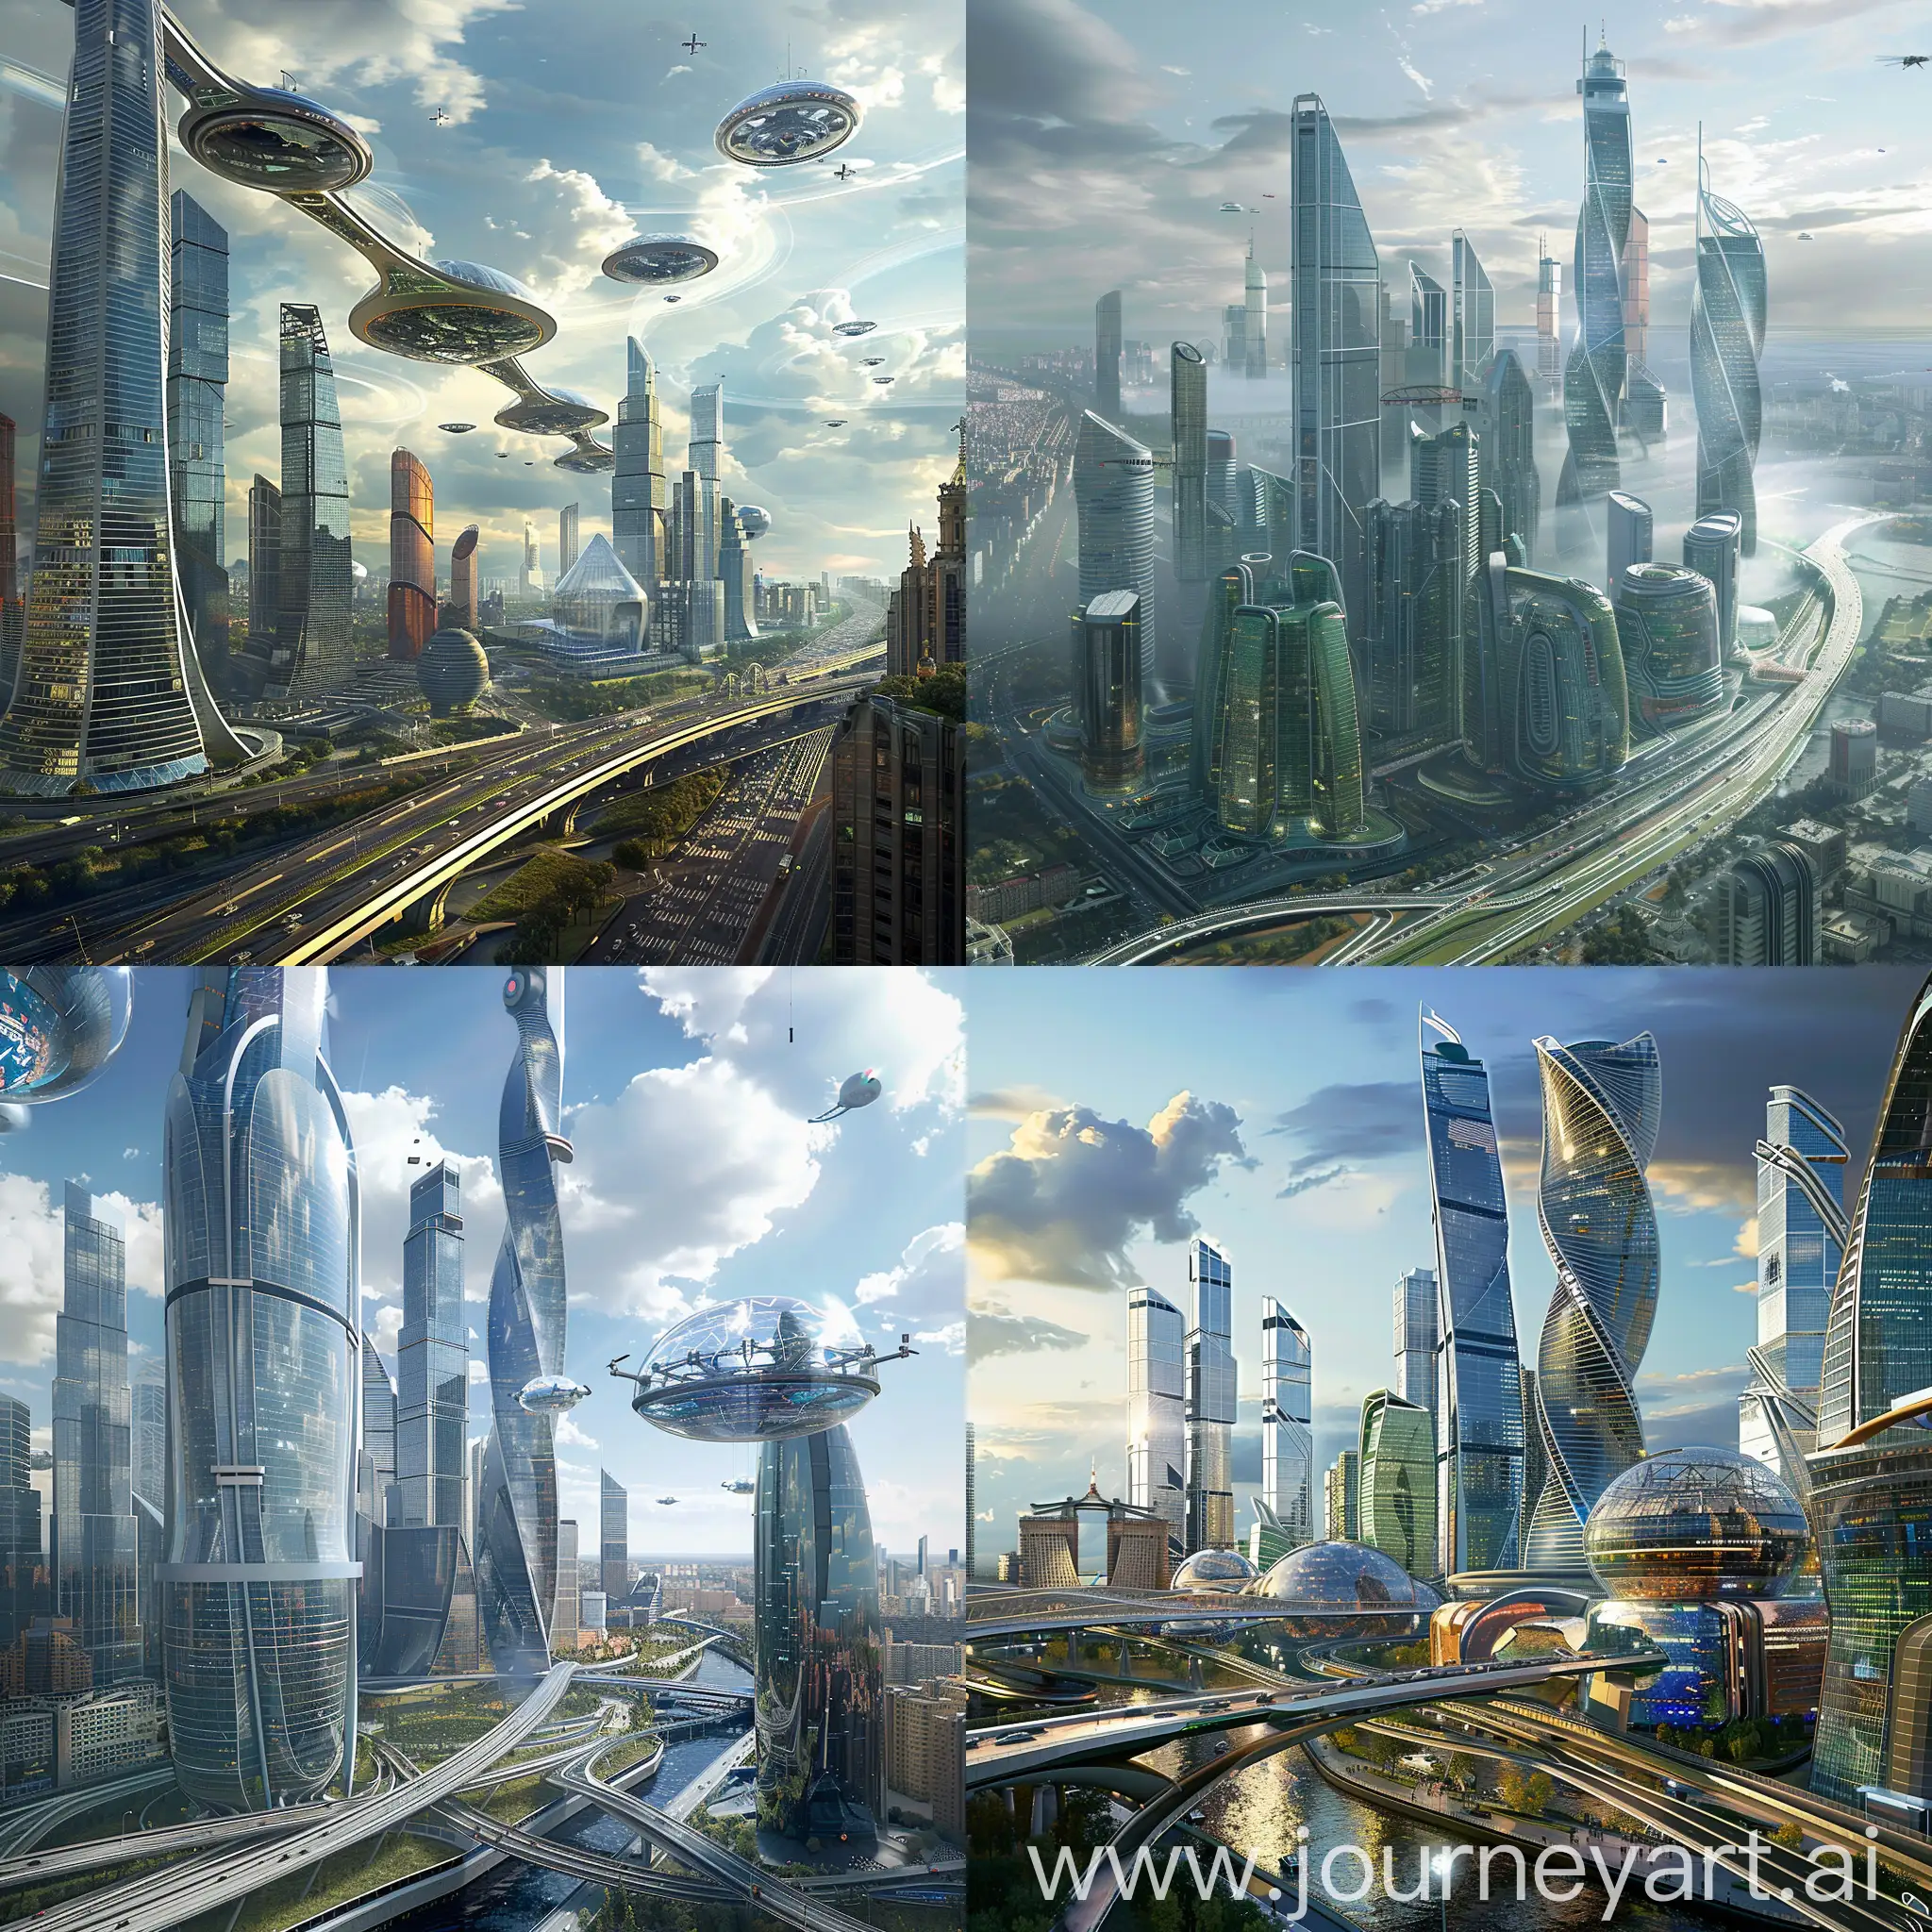 Futuristic-Moscow-EcoSkyscrapers-and-Hyperloop-Transit-in-SciFi-Style